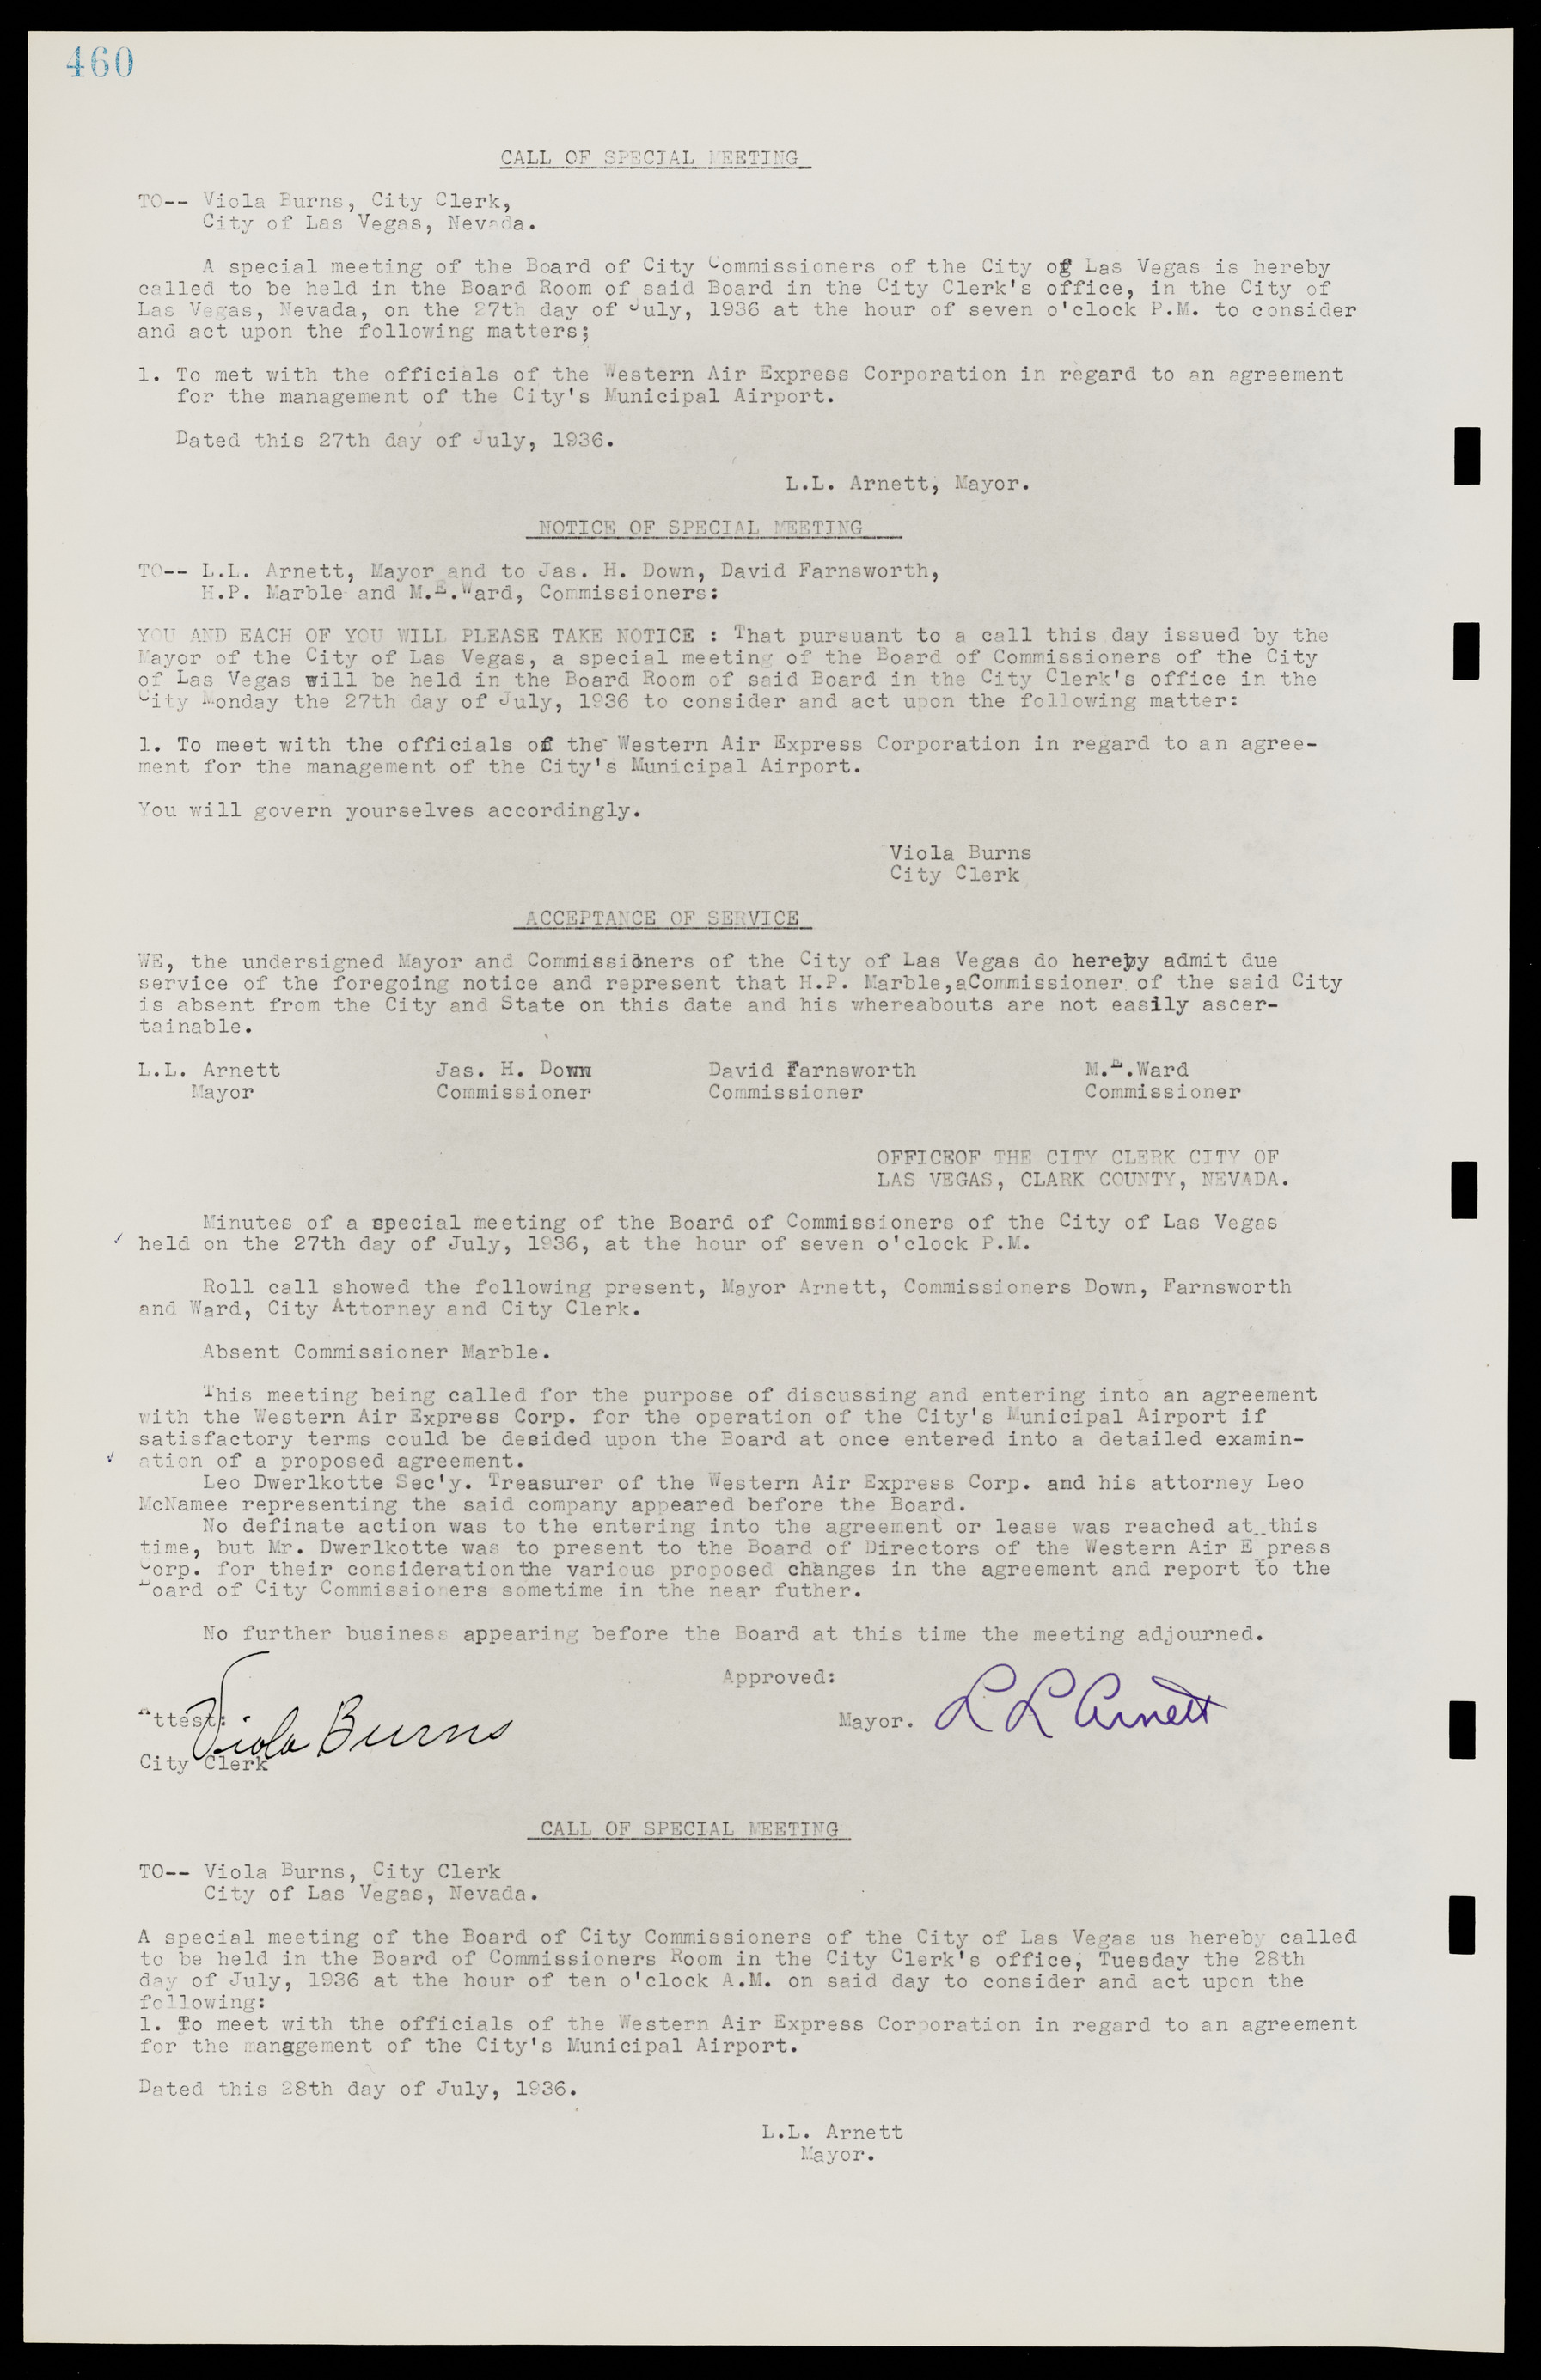 Las Vegas City Commission Minutes, May 14, 1929 to February 11, 1937, lvc000003-467